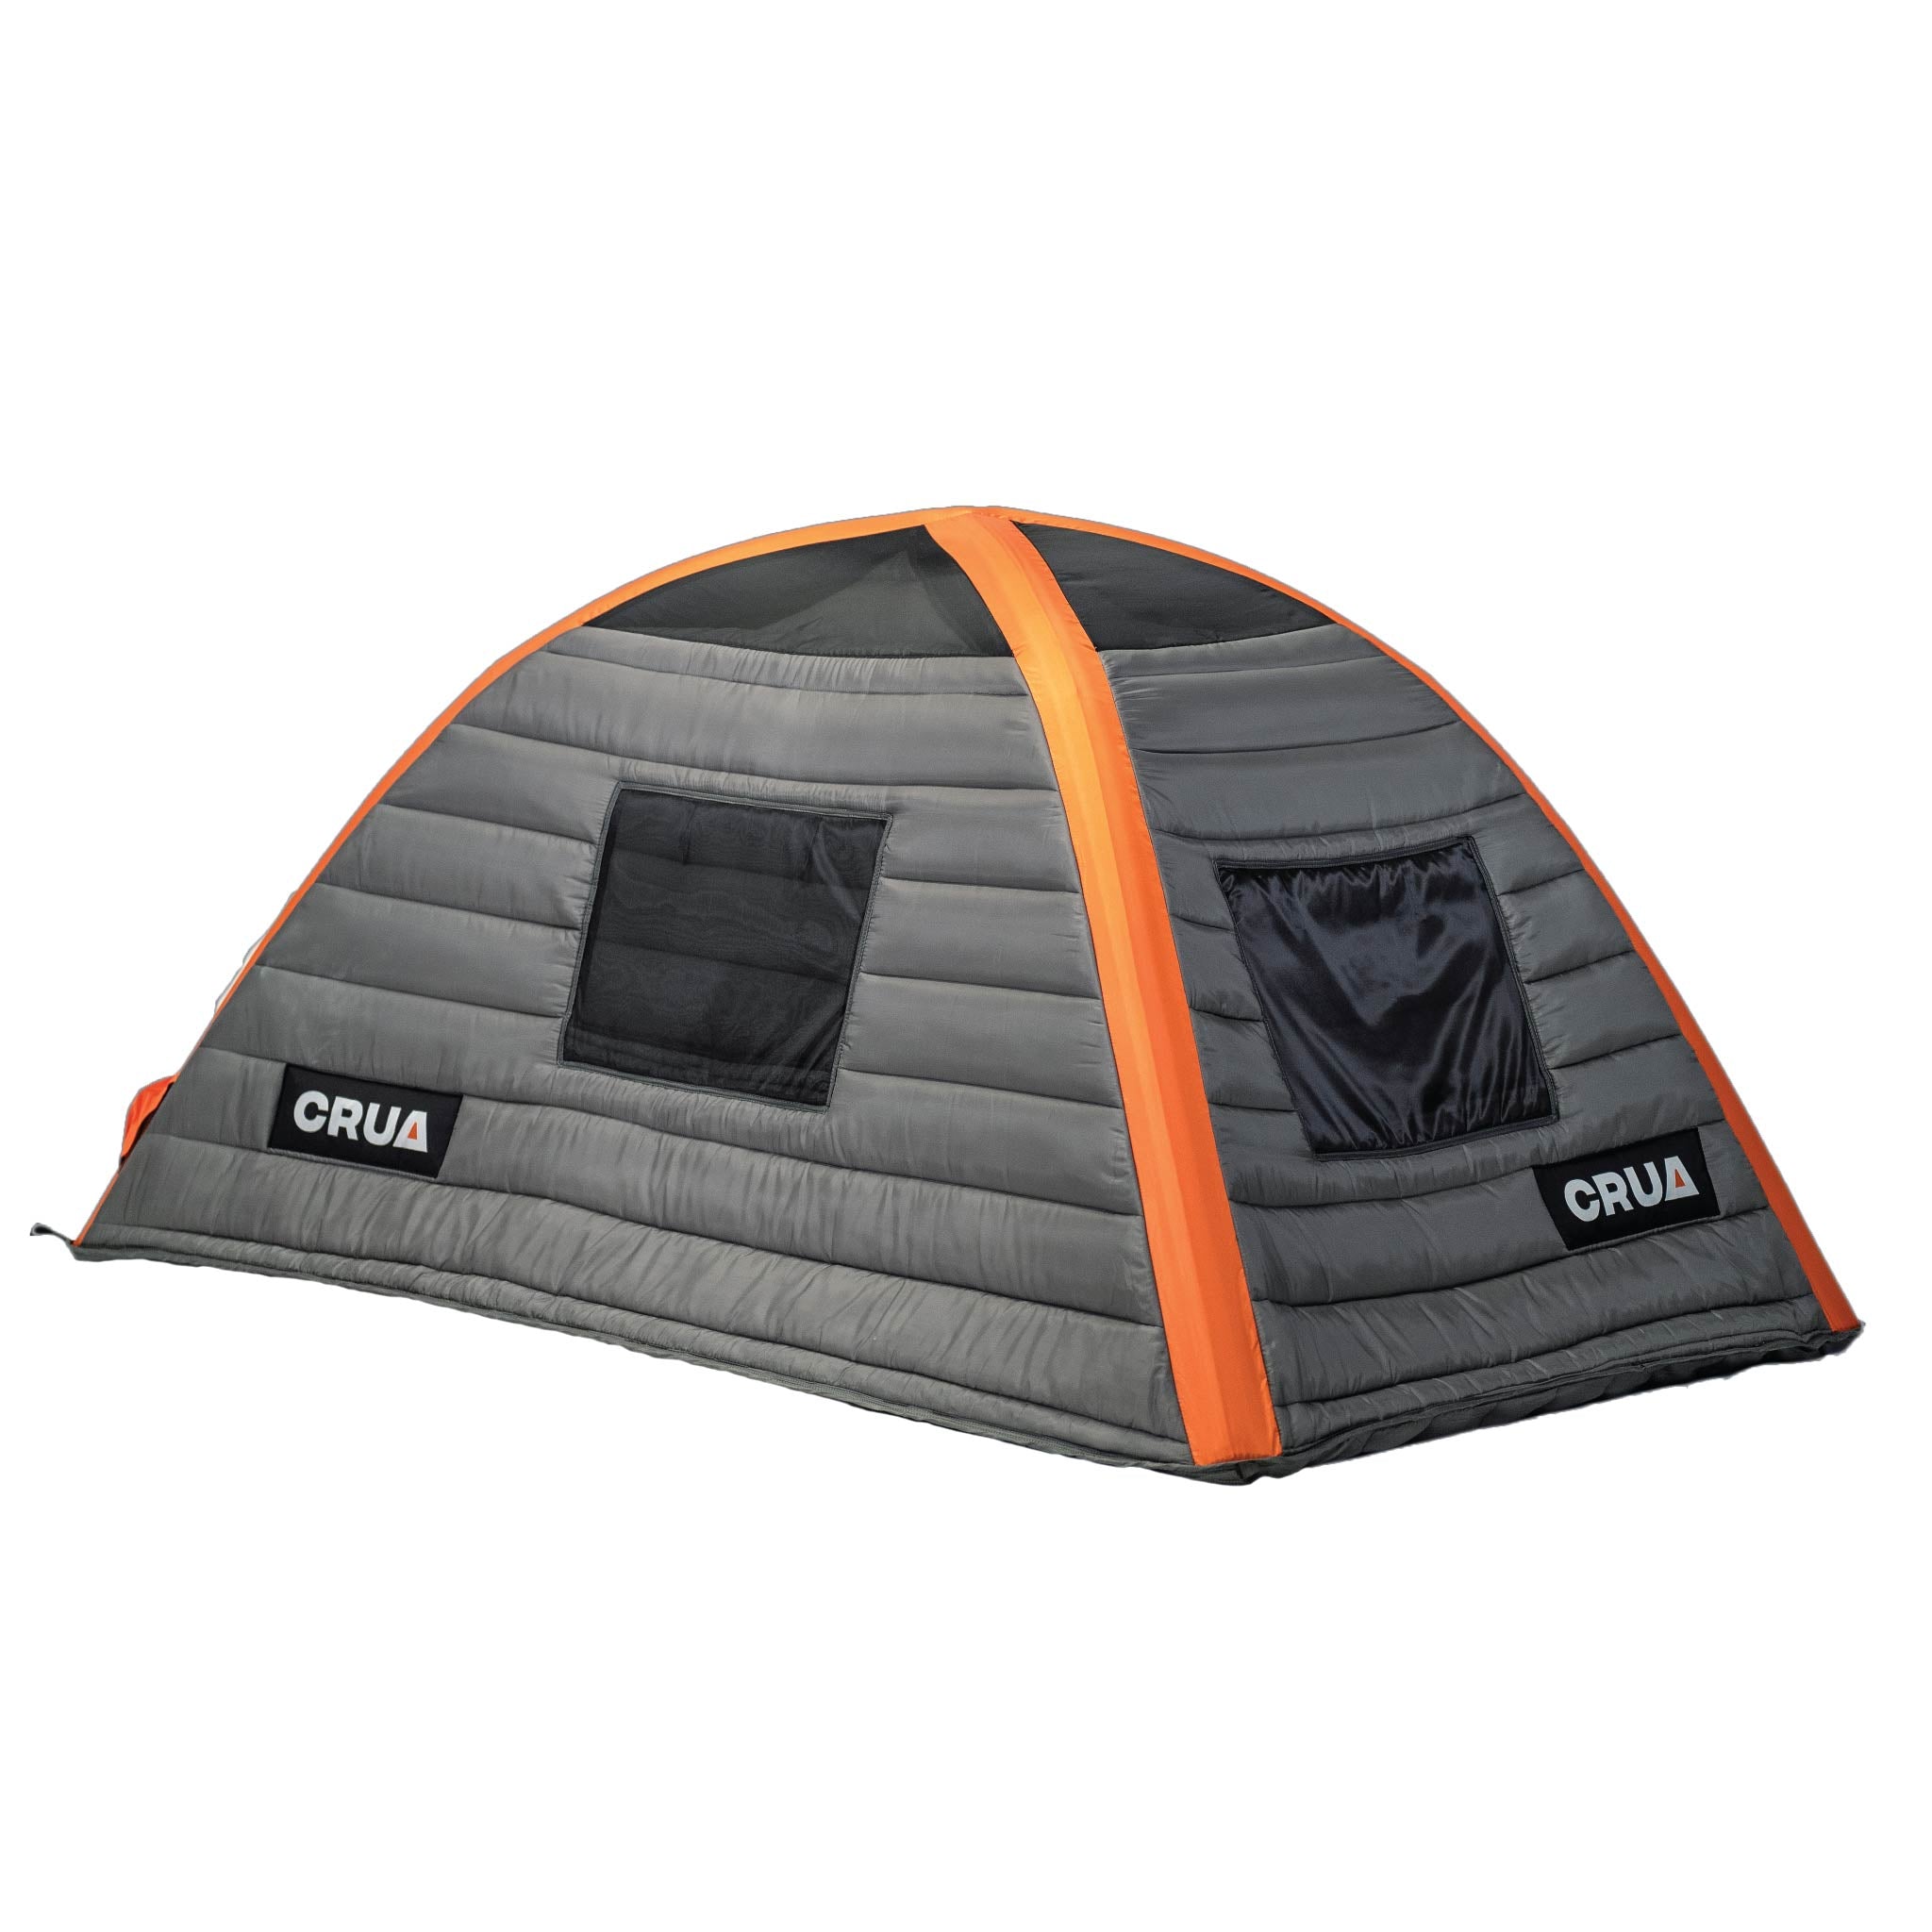 CULLA | 2 PERSON INSULATED INNER TENT WITH TEMPERATURE REGULATING, NOISE DAMPENING AND LIGHT BLOCKING FEATURES